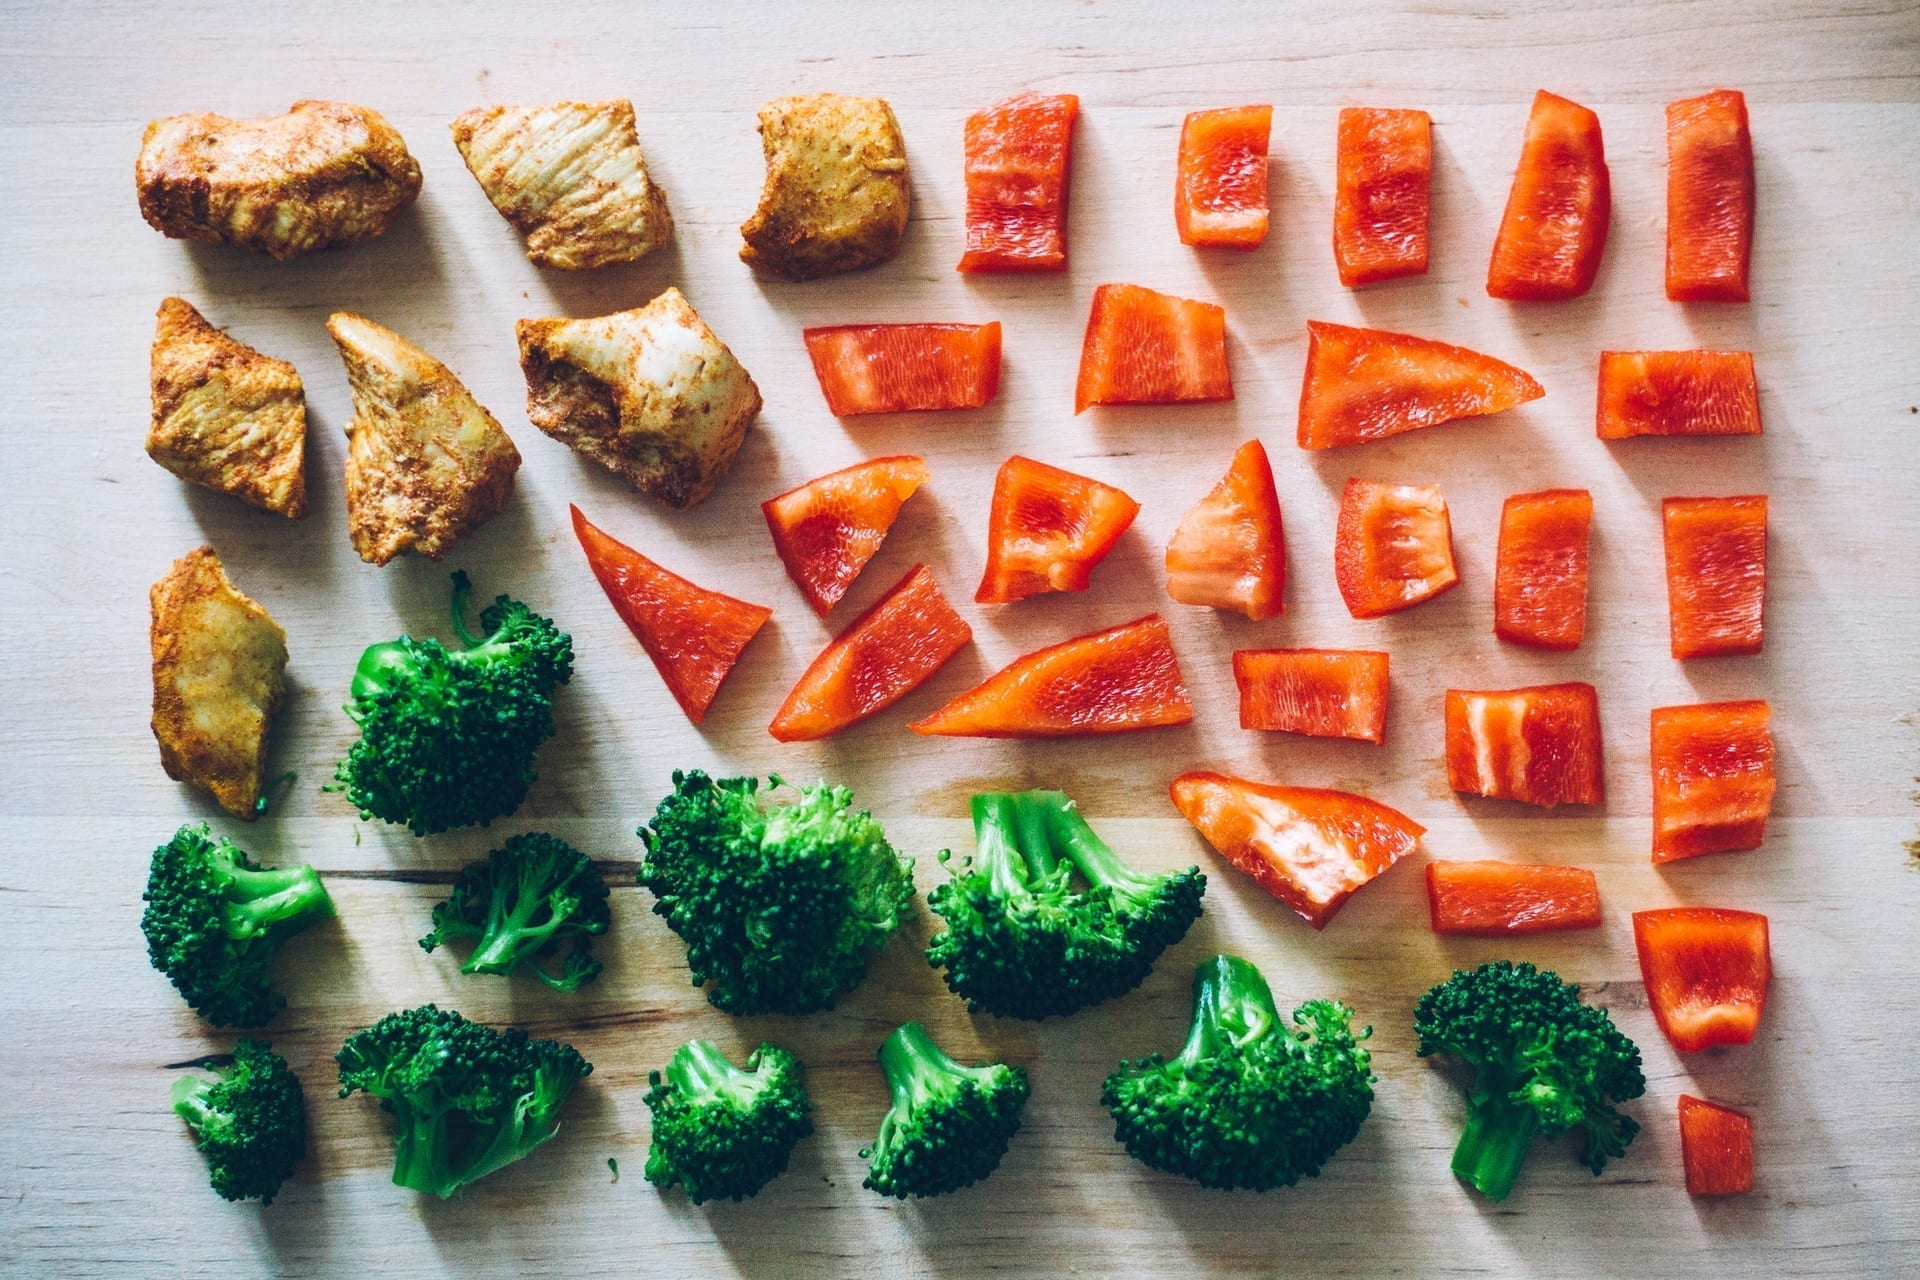 Chopped vegetables/food in a square formation